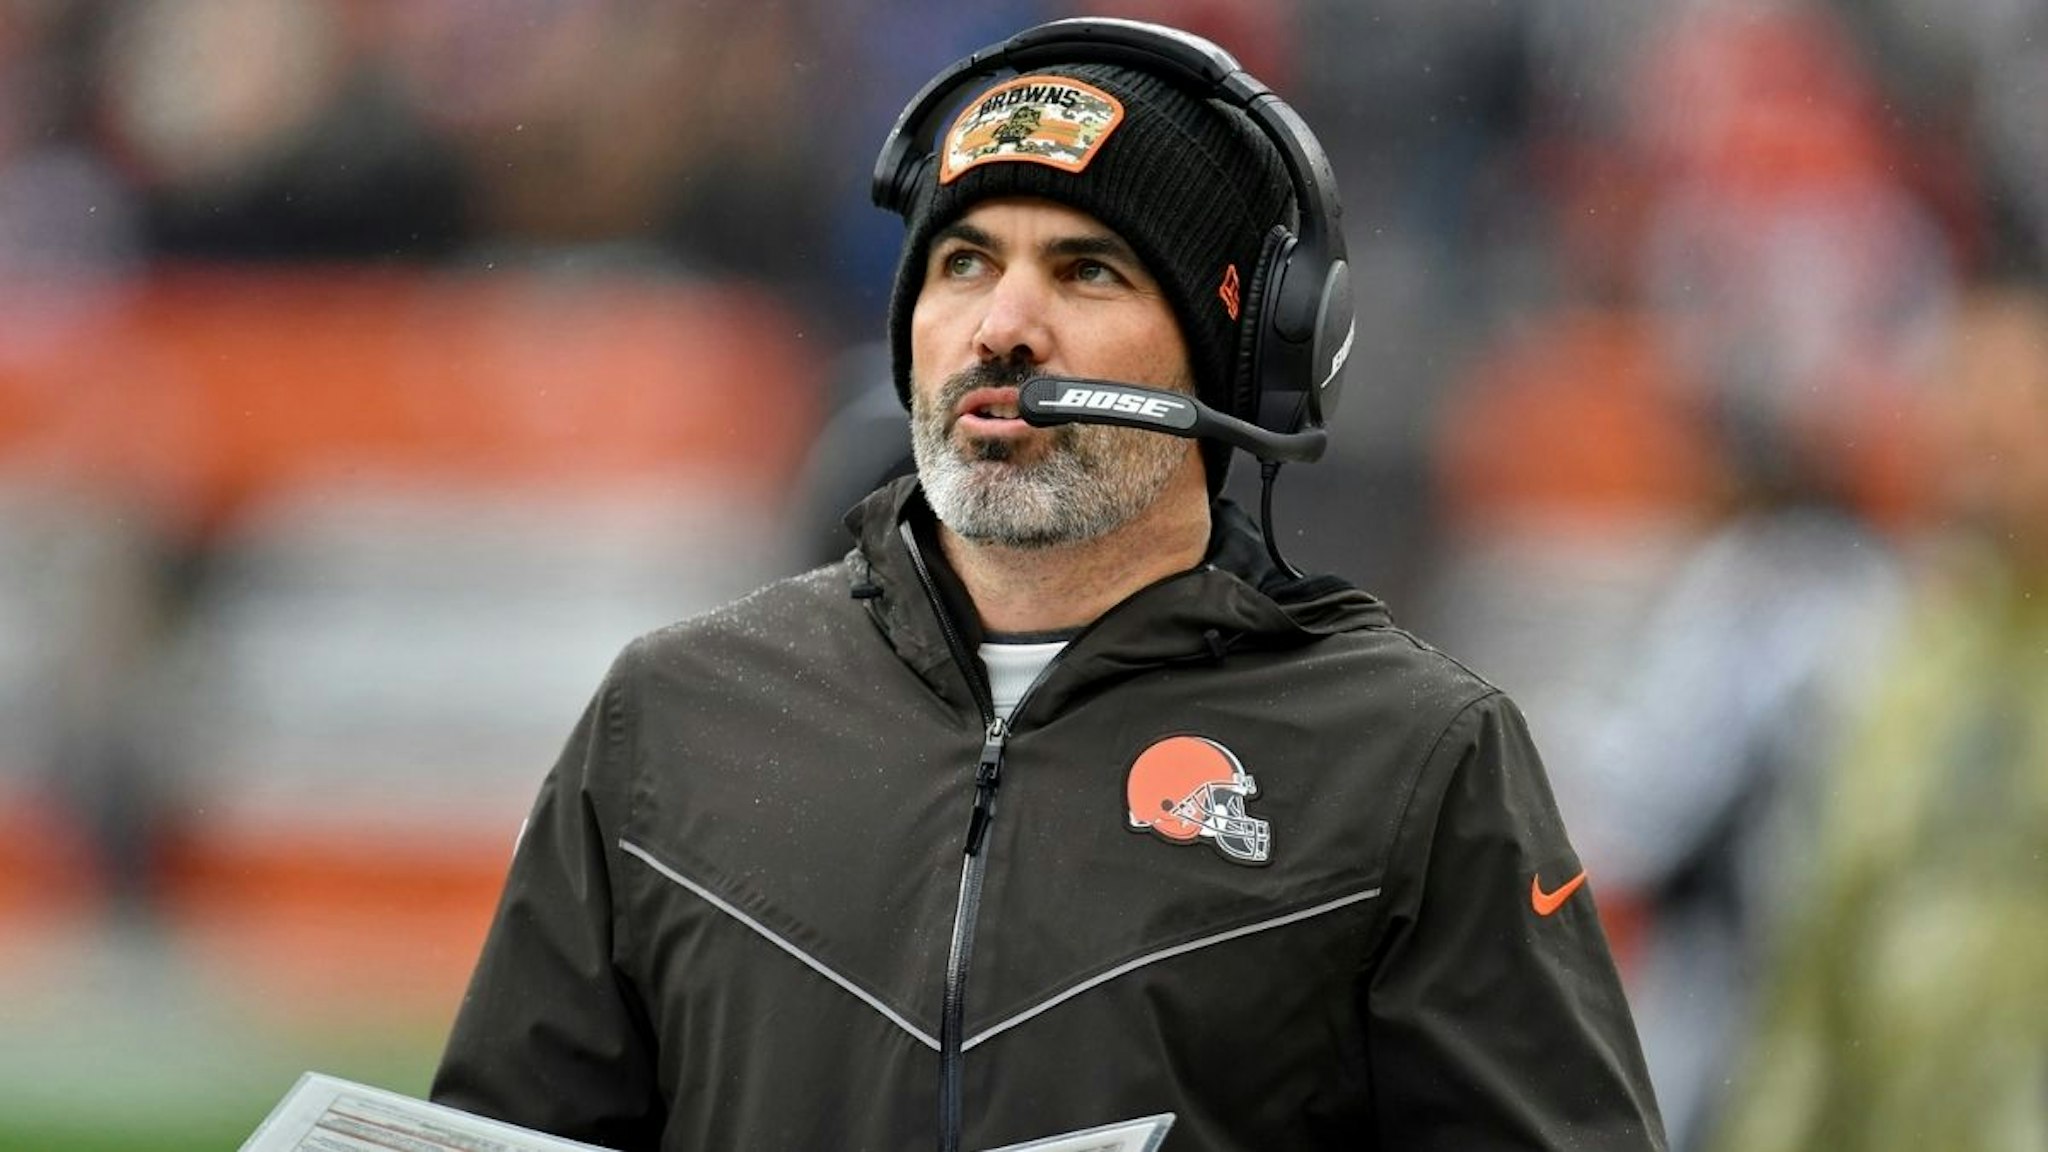 Head coach Kevin Stefanski of the Cleveland Browns looks on from the side line during the game against the Detroit Lions at FirstEnergy Stadium on November 21, 2021 in Cleveland, Ohio.